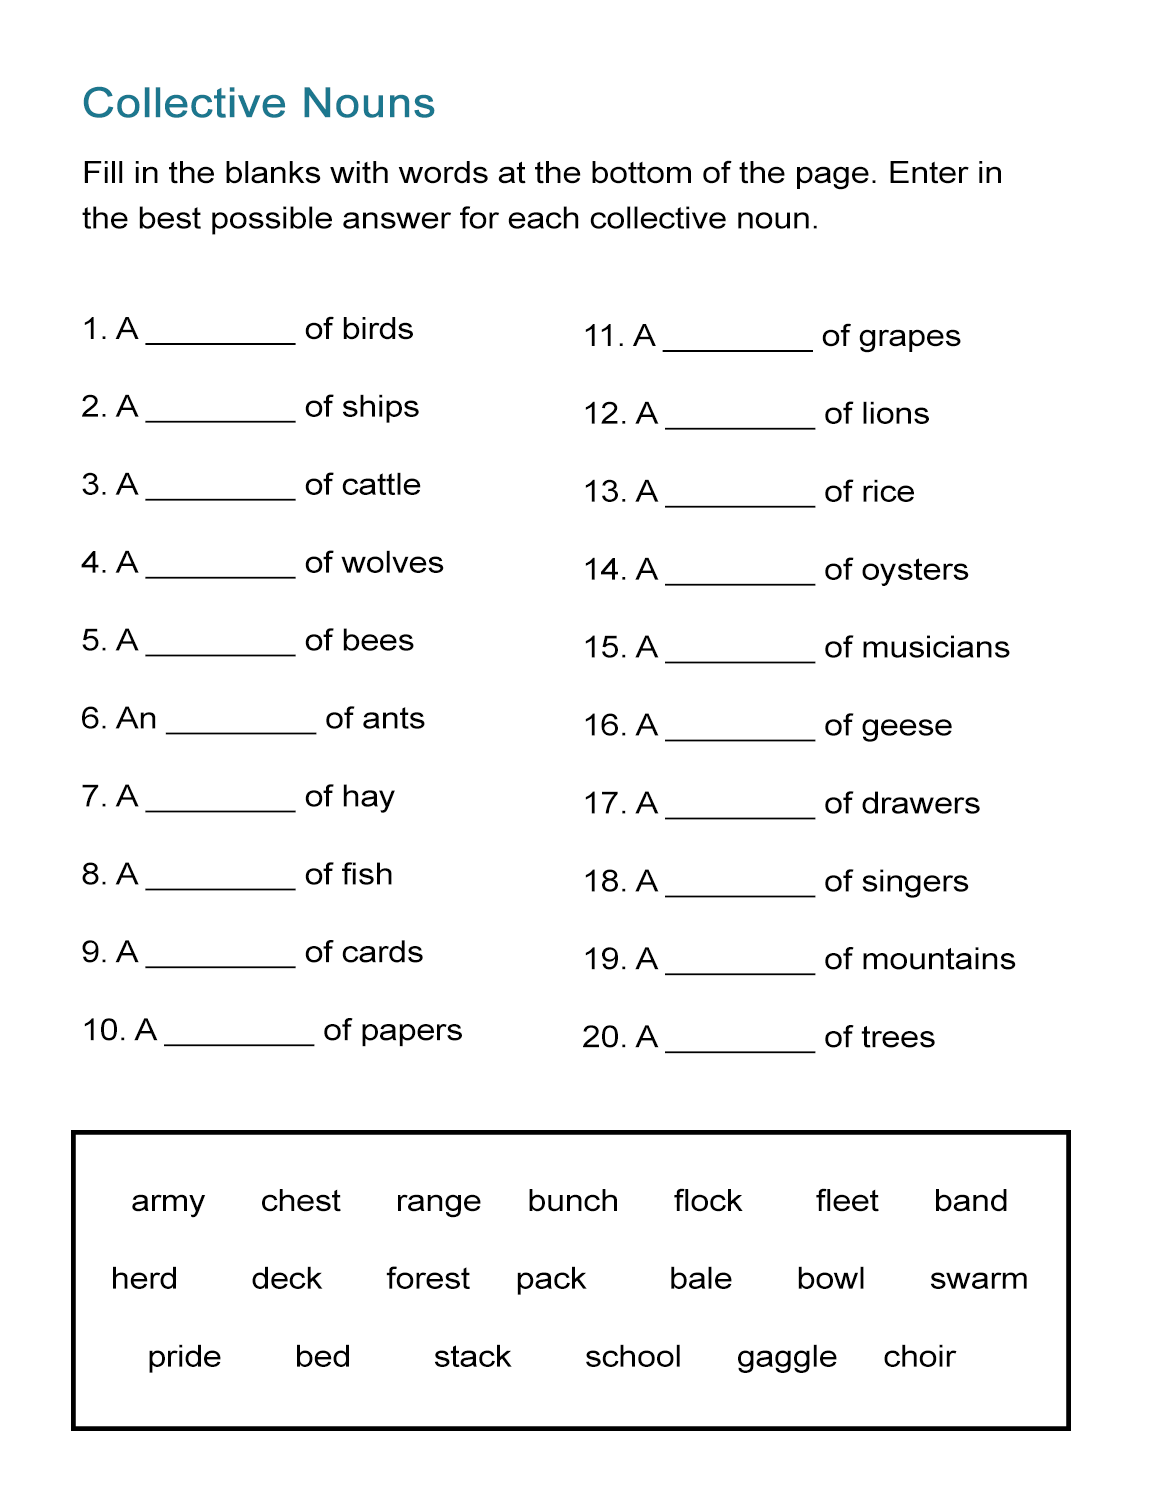 Collective Nouns Worksheet Fill In The Blanks All Esl 9 Best 6 8 App 